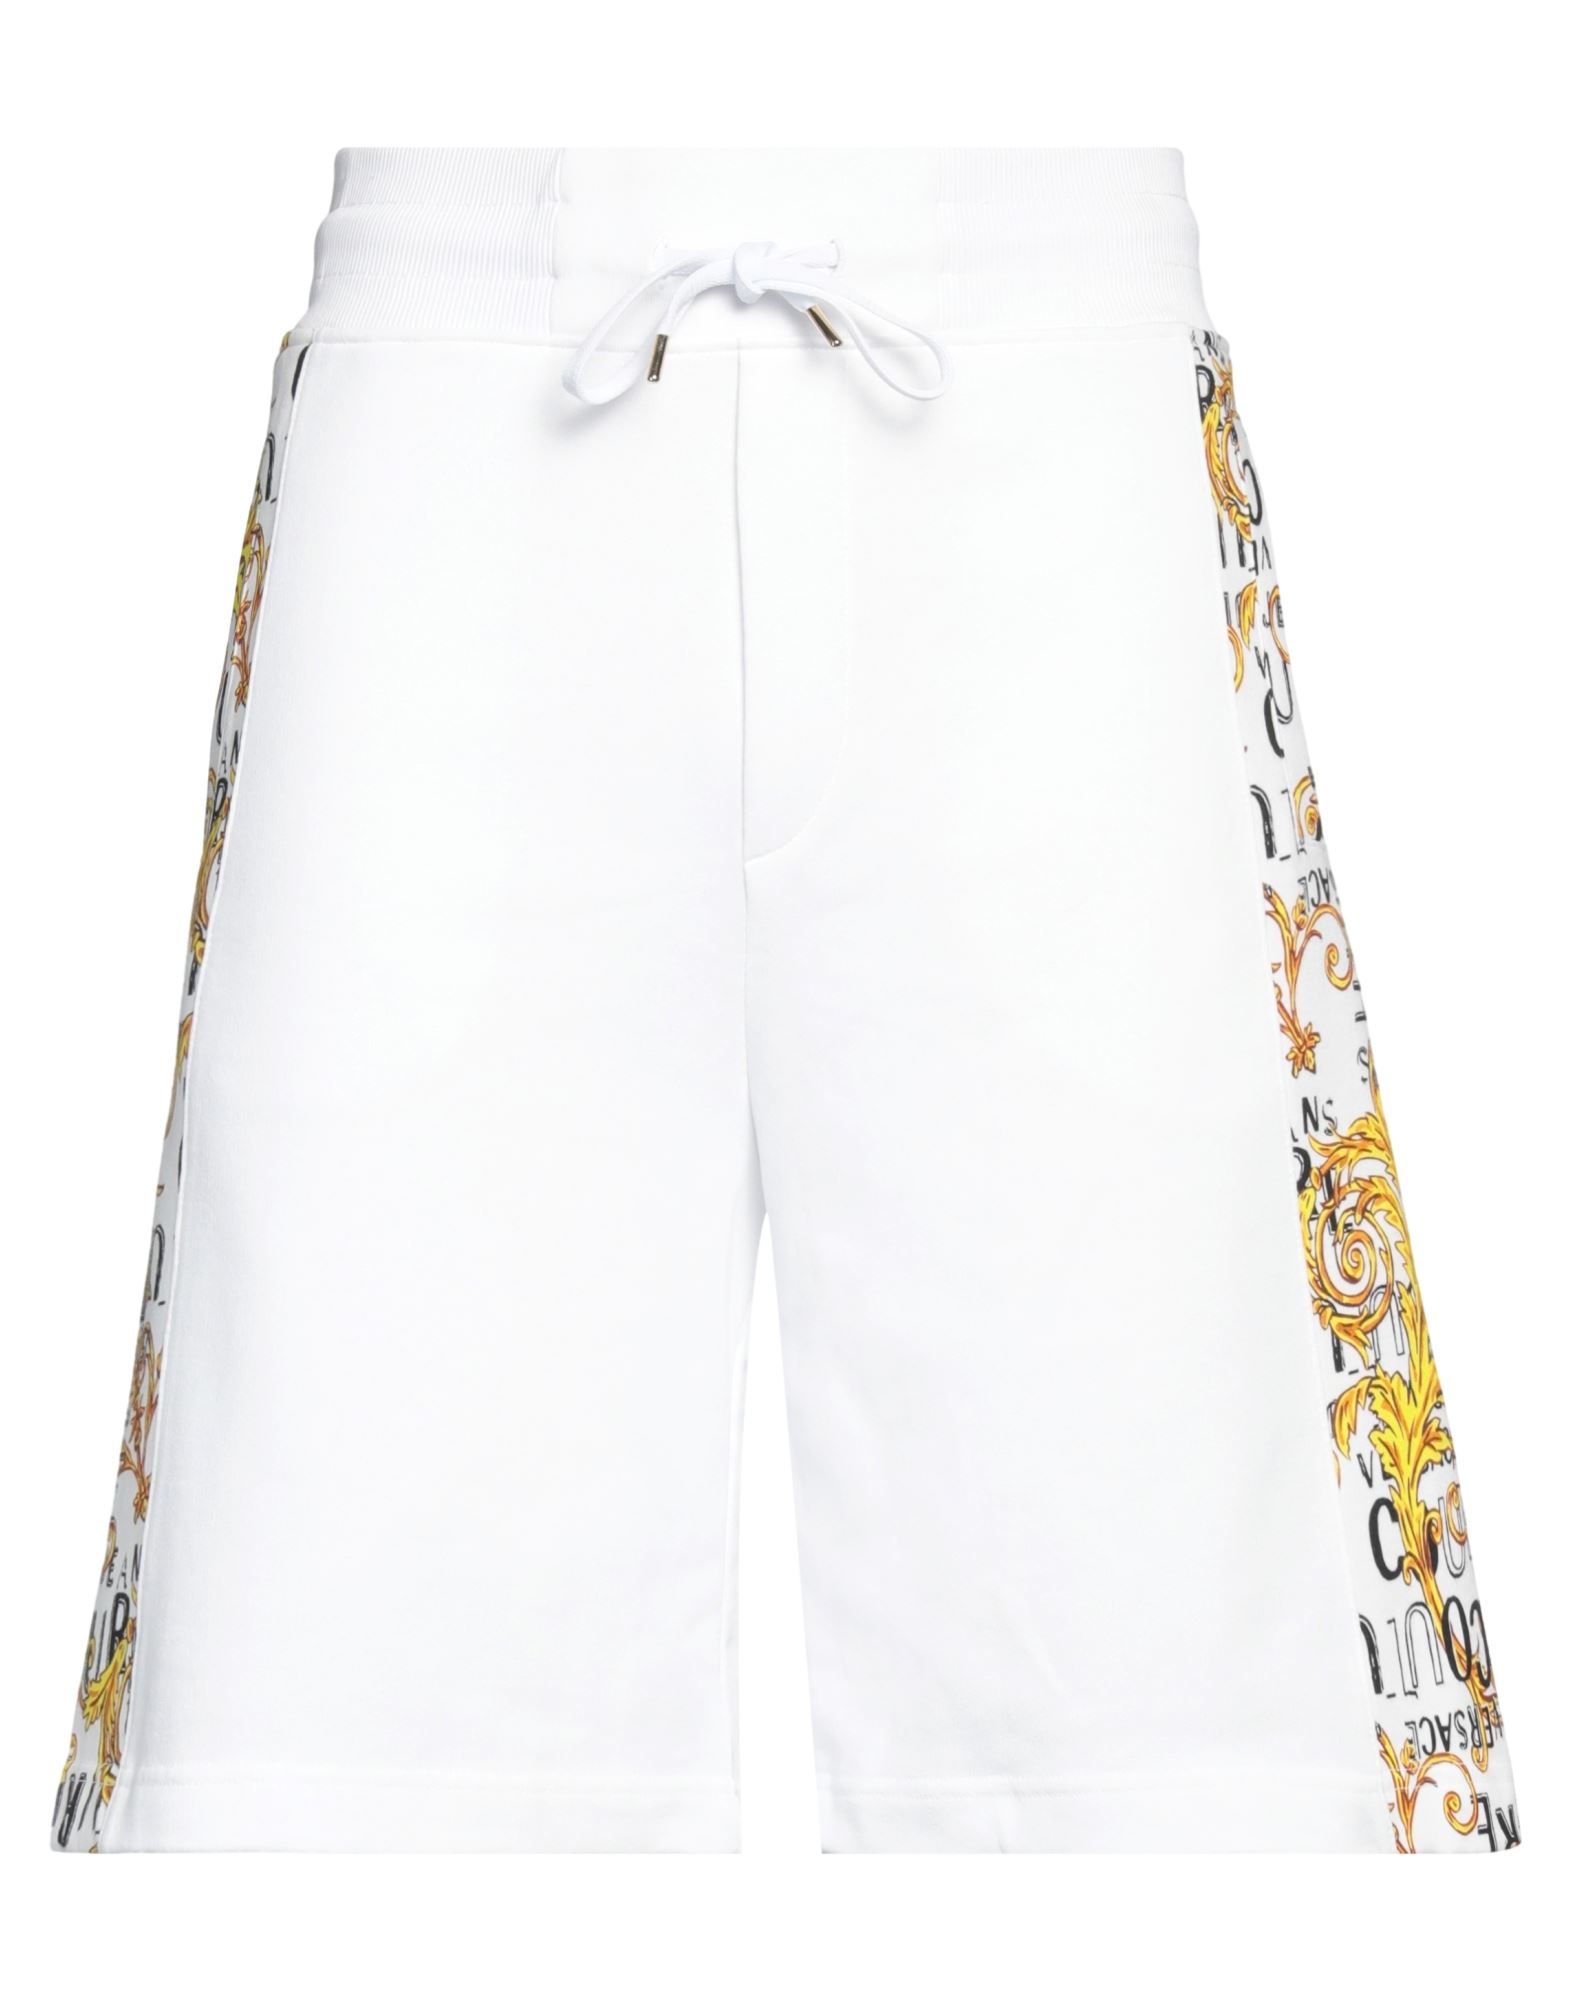 VERSACE JEANS COUTURE Shorts & Bermudashorts Herren Weiß von VERSACE JEANS COUTURE